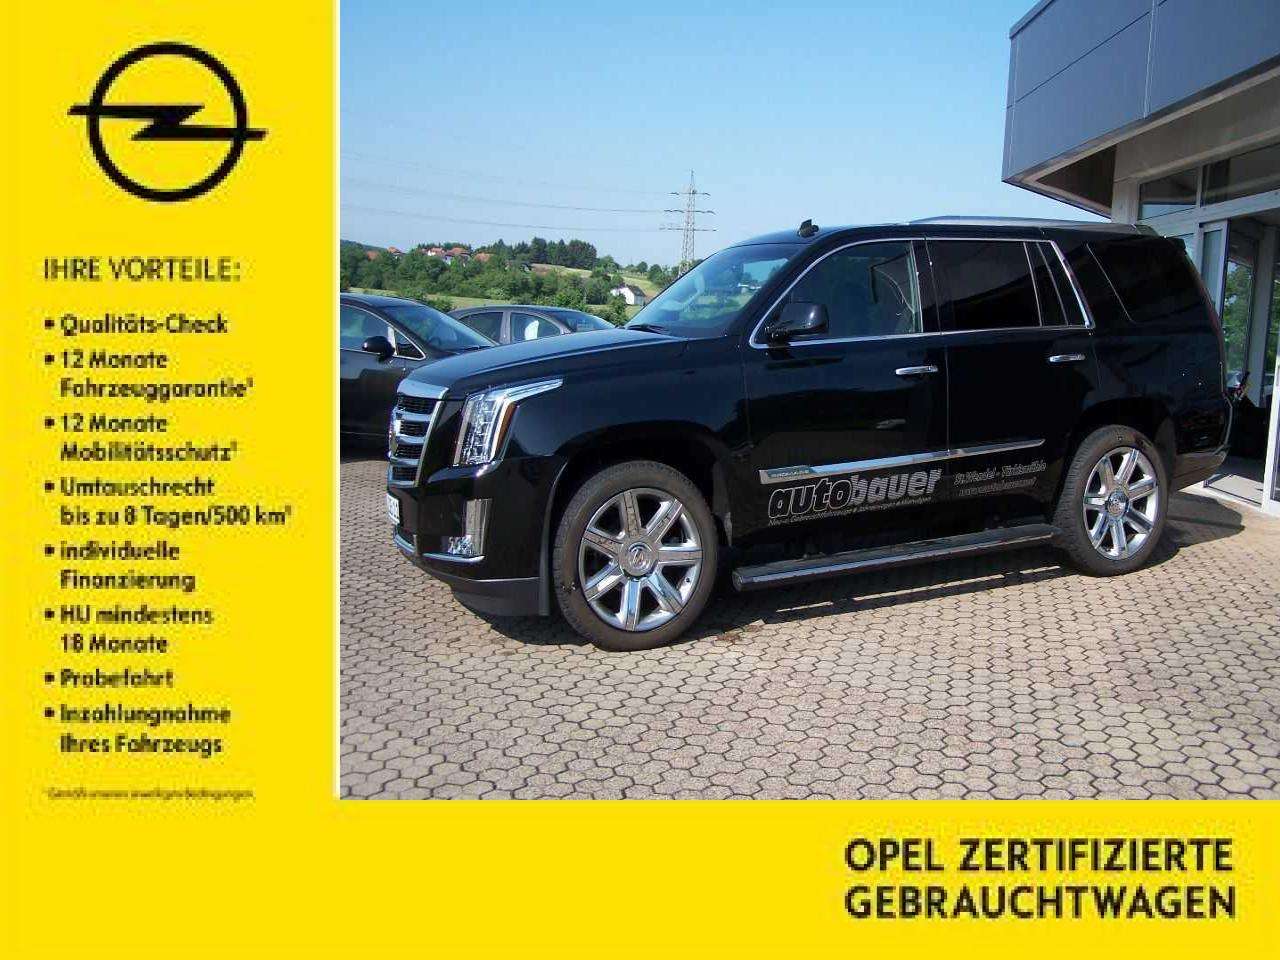 Cadillac Escalade Off-Road/Pick-up in Black used in St. Wendel for € 69,900.-